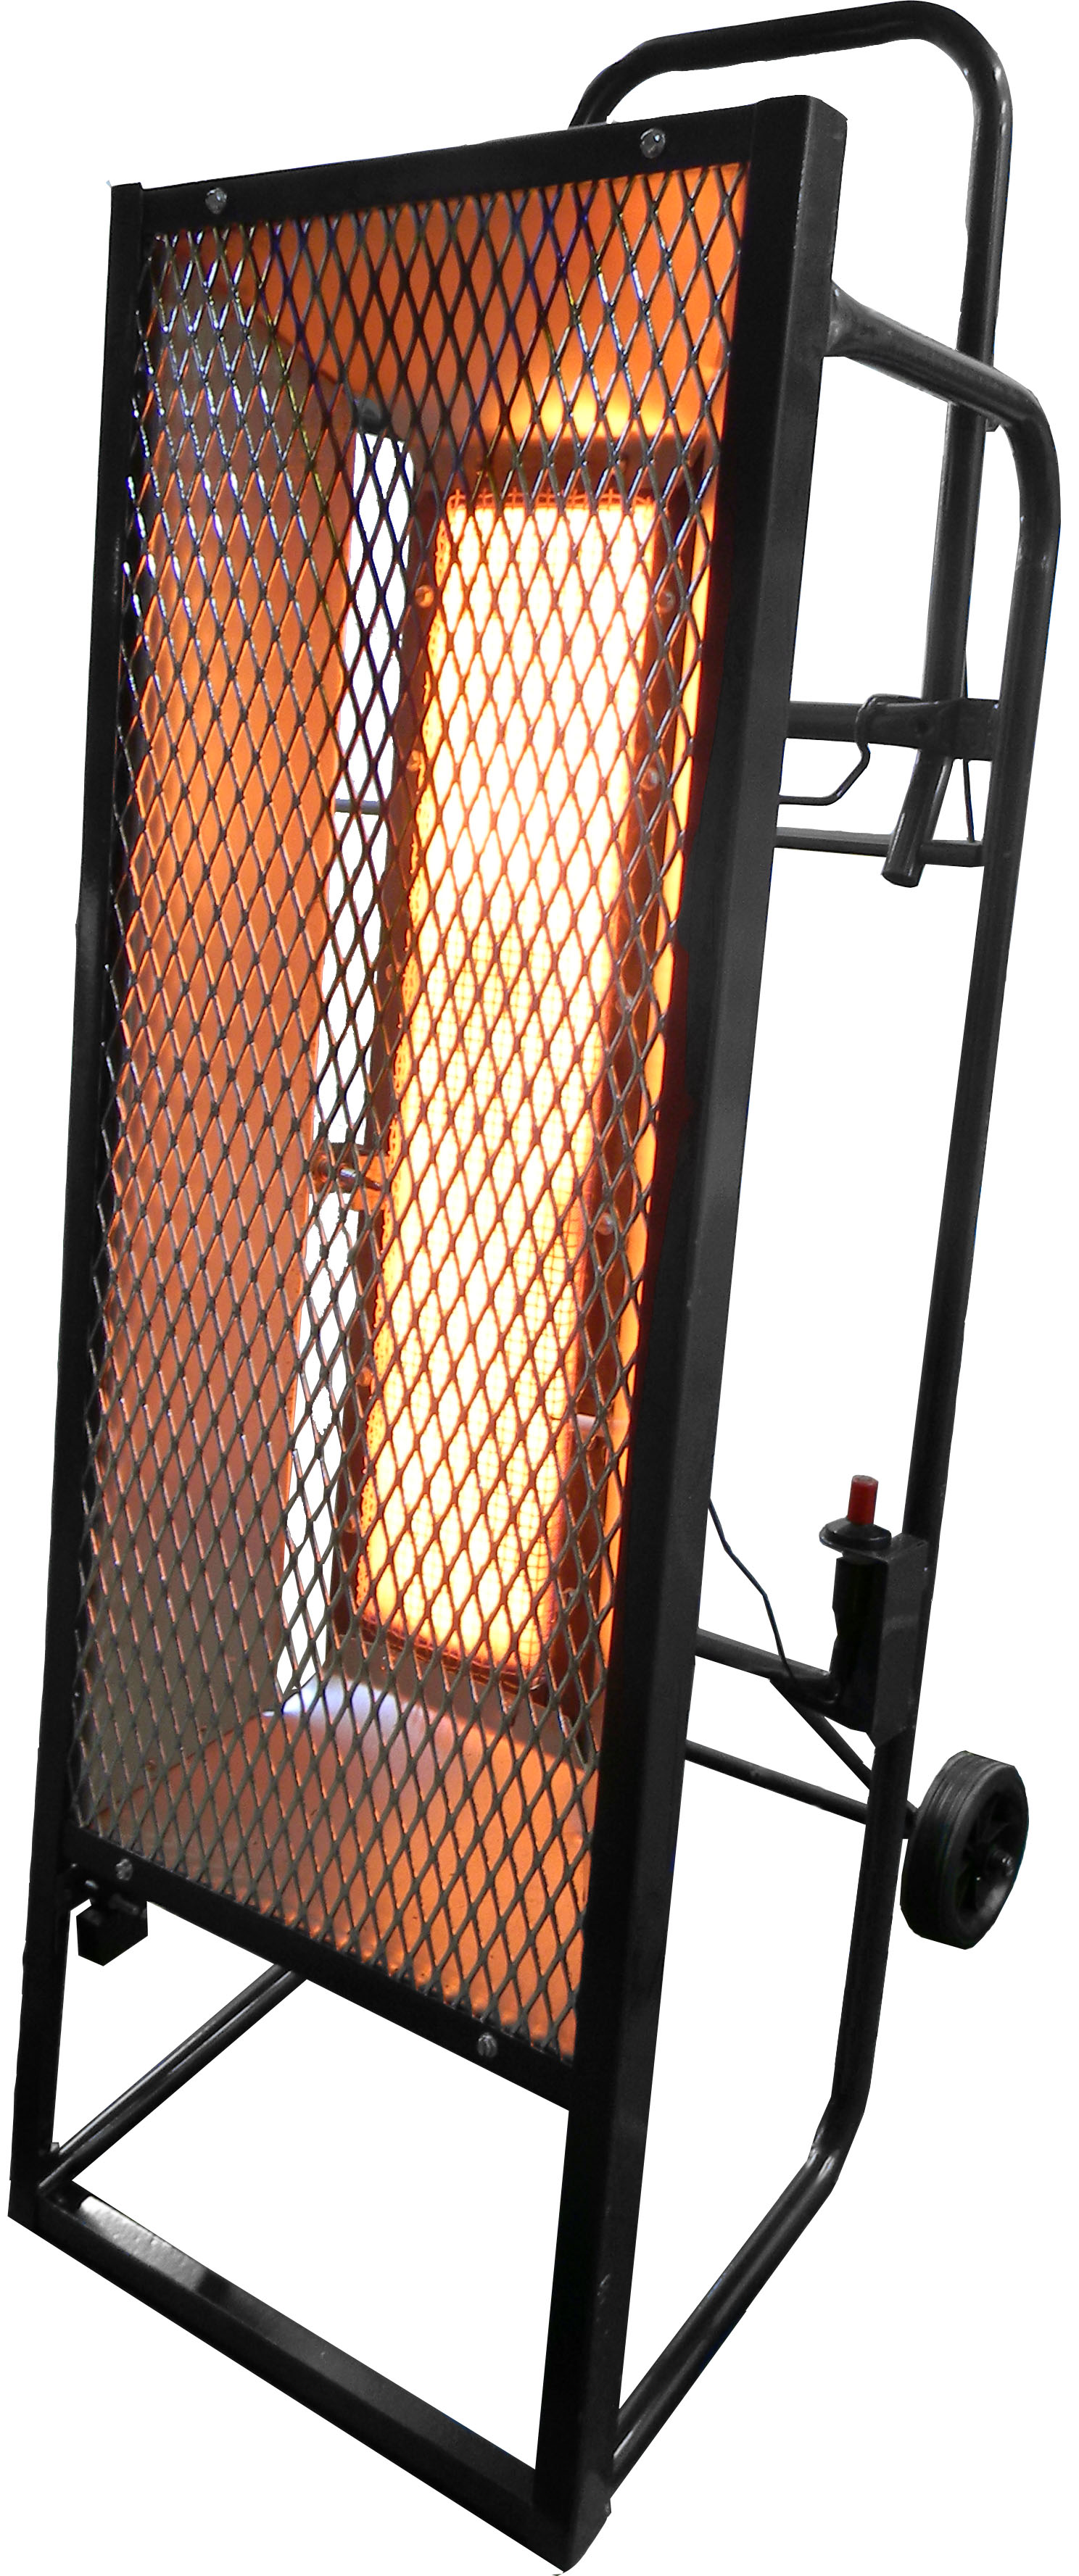 Are L. B. White propane heaters highly rated?